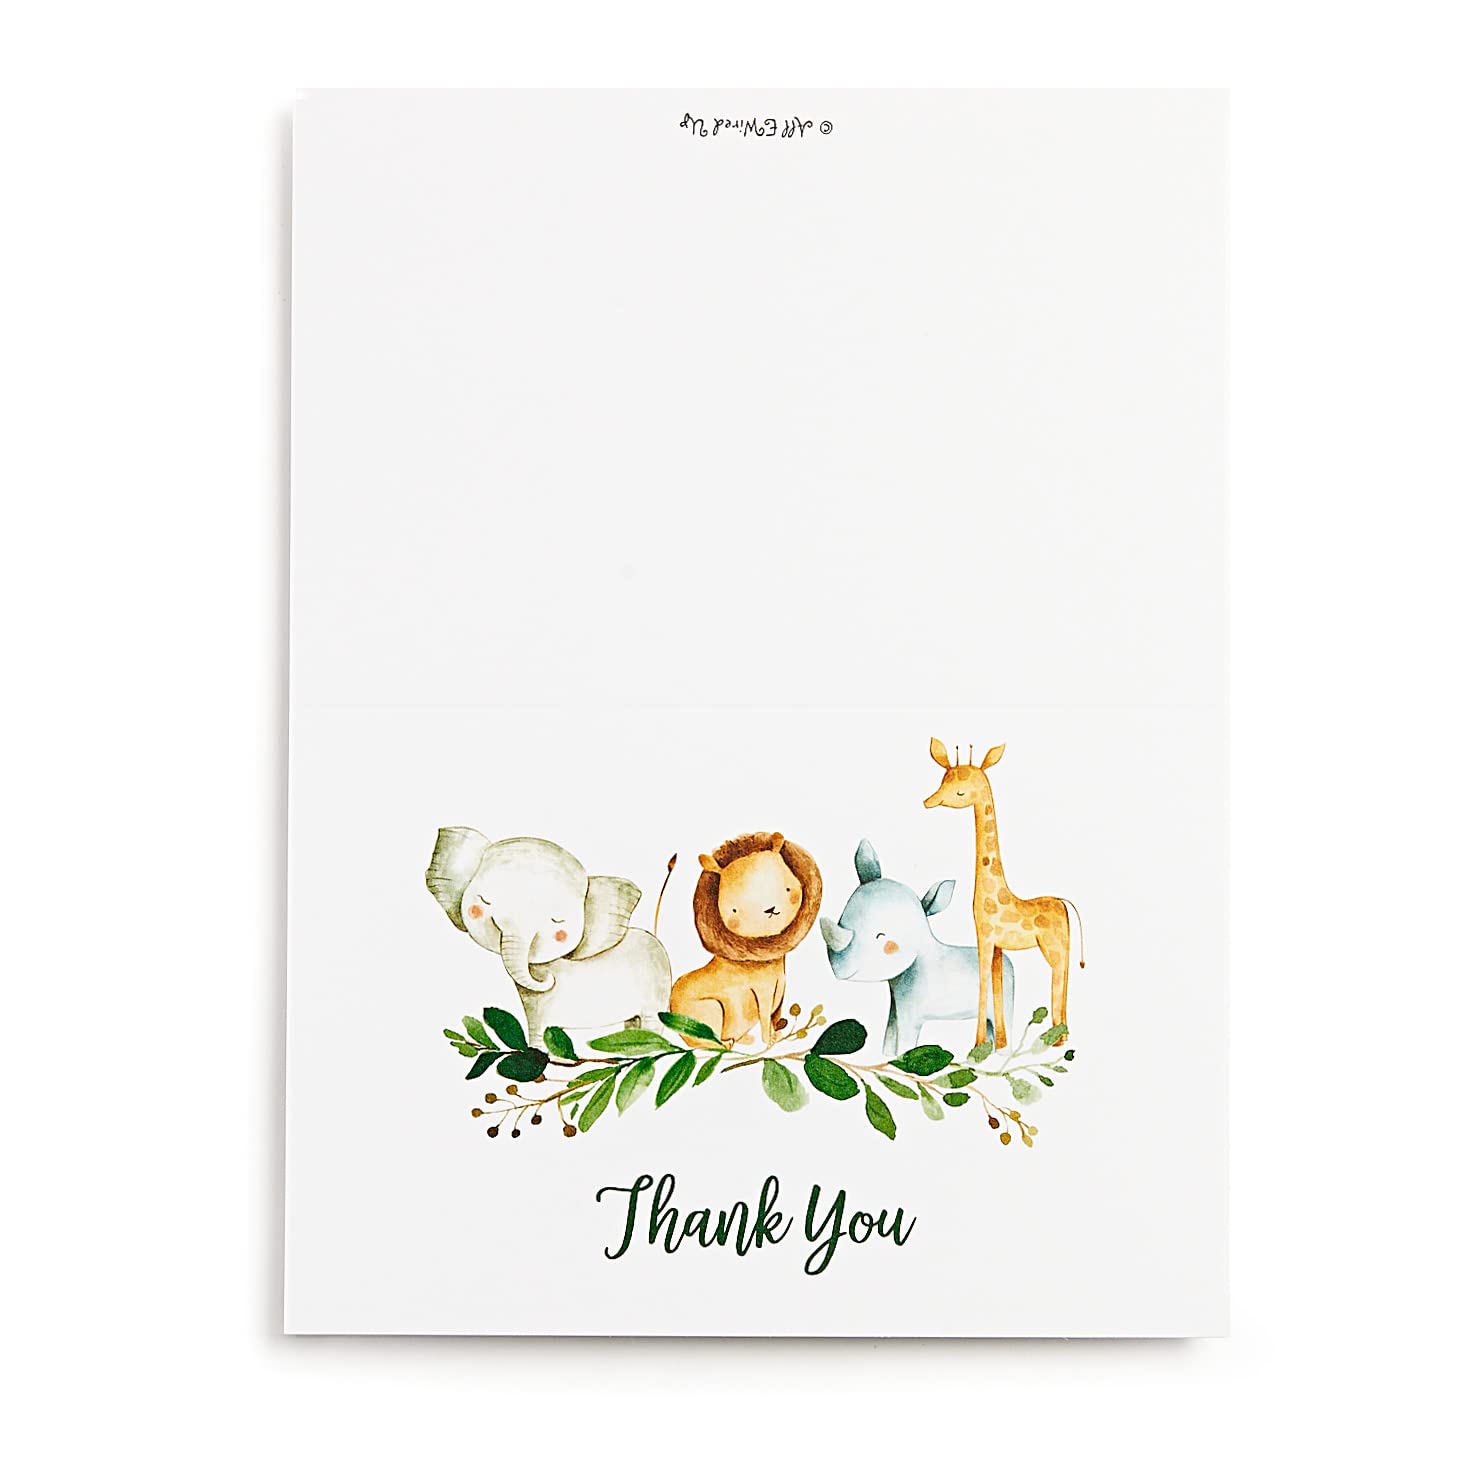 25 Boxed Safari Thank You Cards With Envelopes (Thick Card Stock) Baby Shower, Jungle Greenery Large Size 4x6 Zoo Animal Giraffe Lion Elephant Gratitude For Party, Girl Boy Children Birthday Stationery